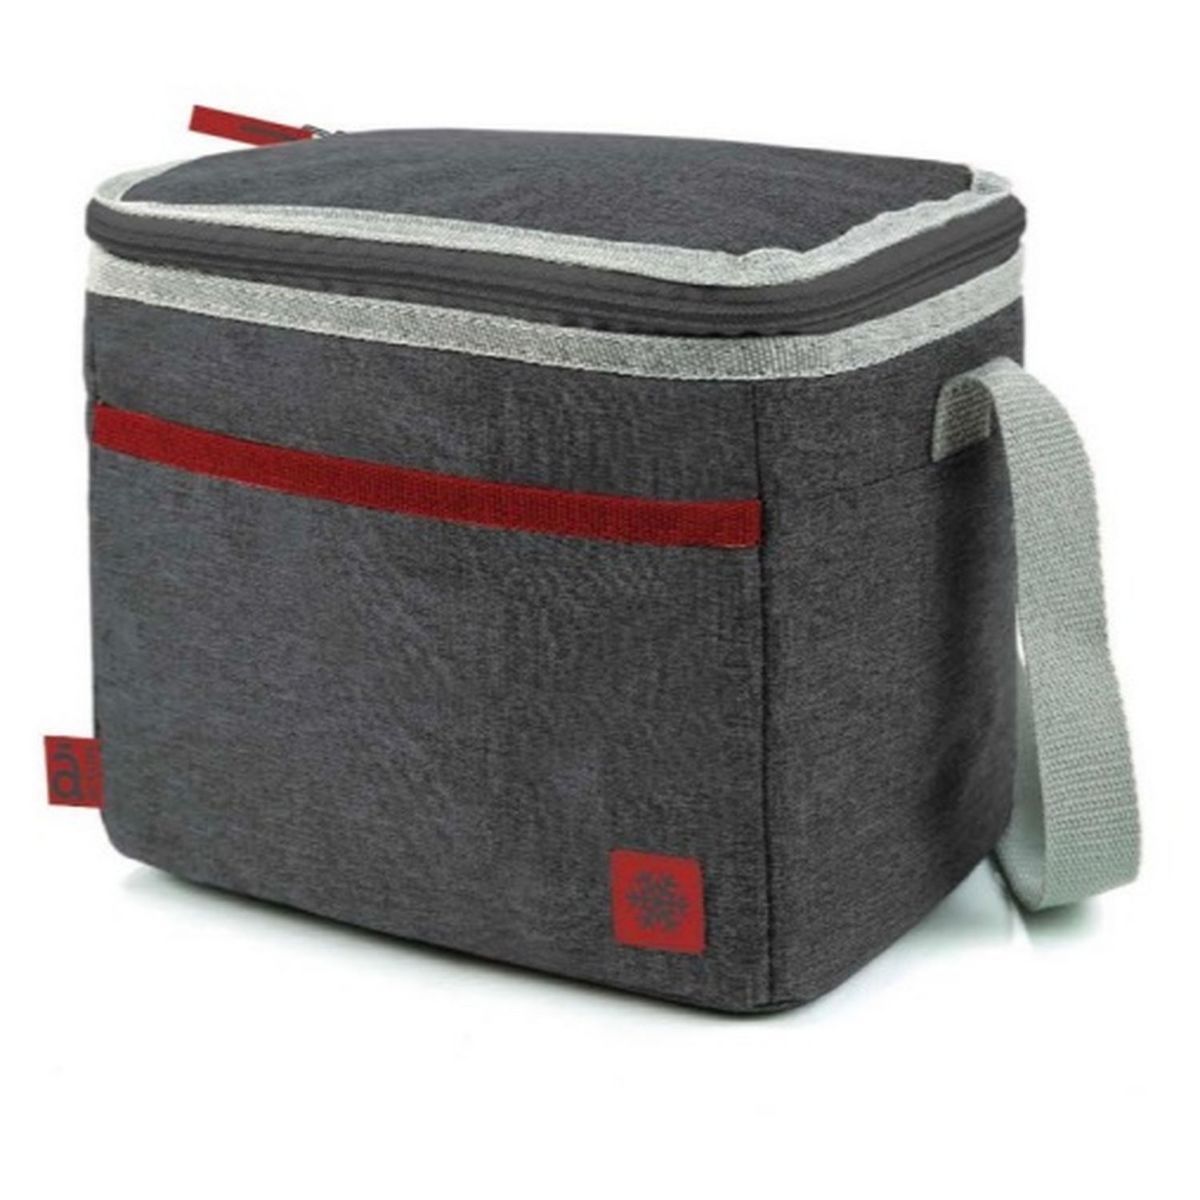 ACTUEL Sac repas isotherme gris